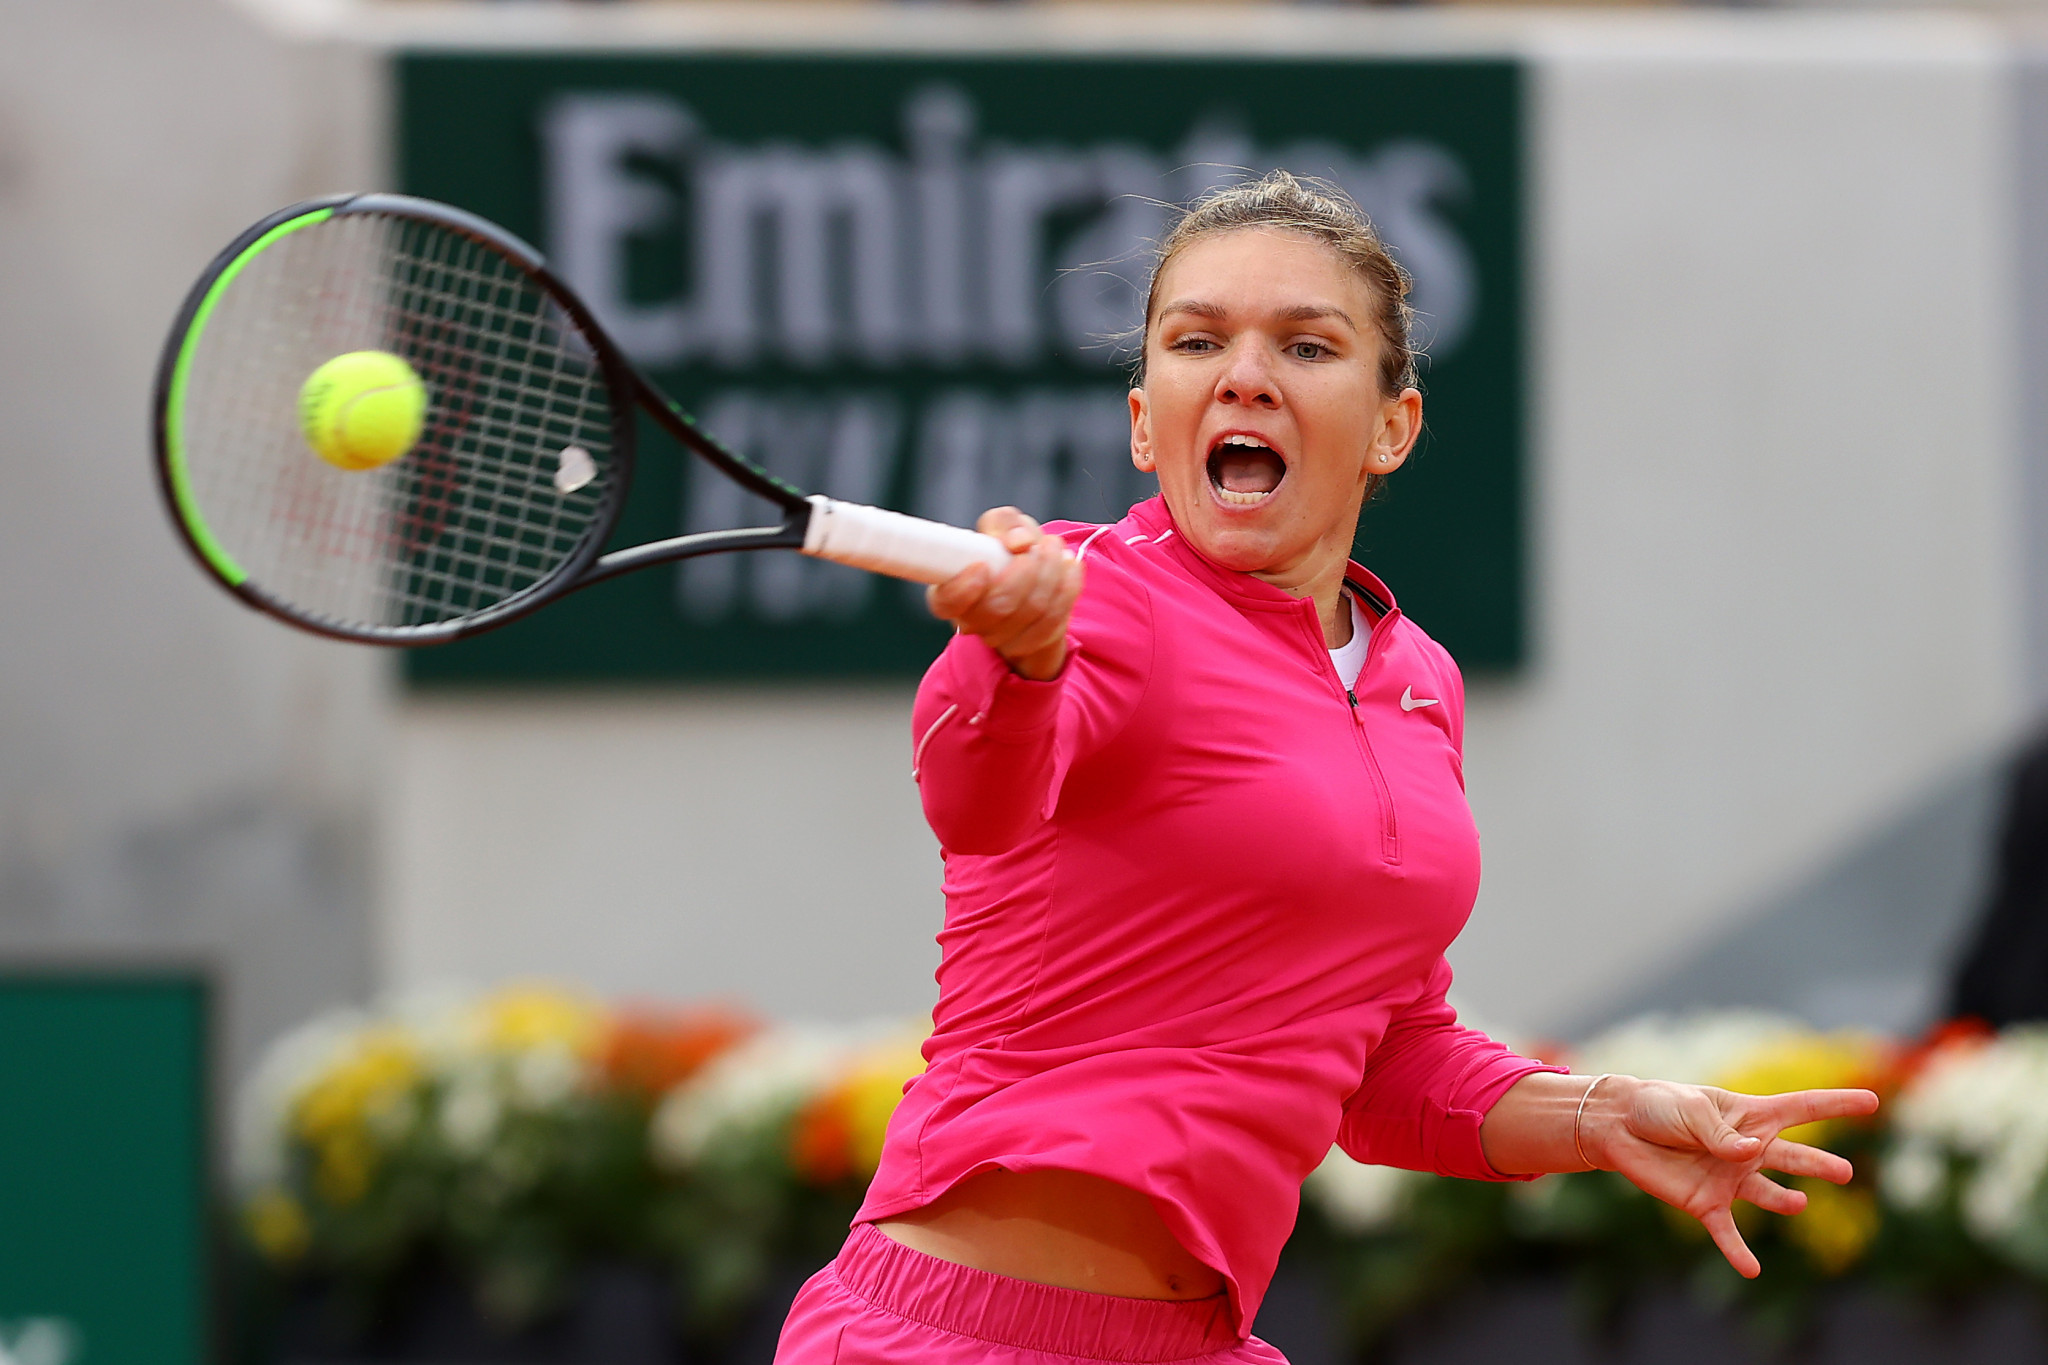 Women's top seed Simona Halep won in straight sets to reach round three of the French Open ©Getty Images